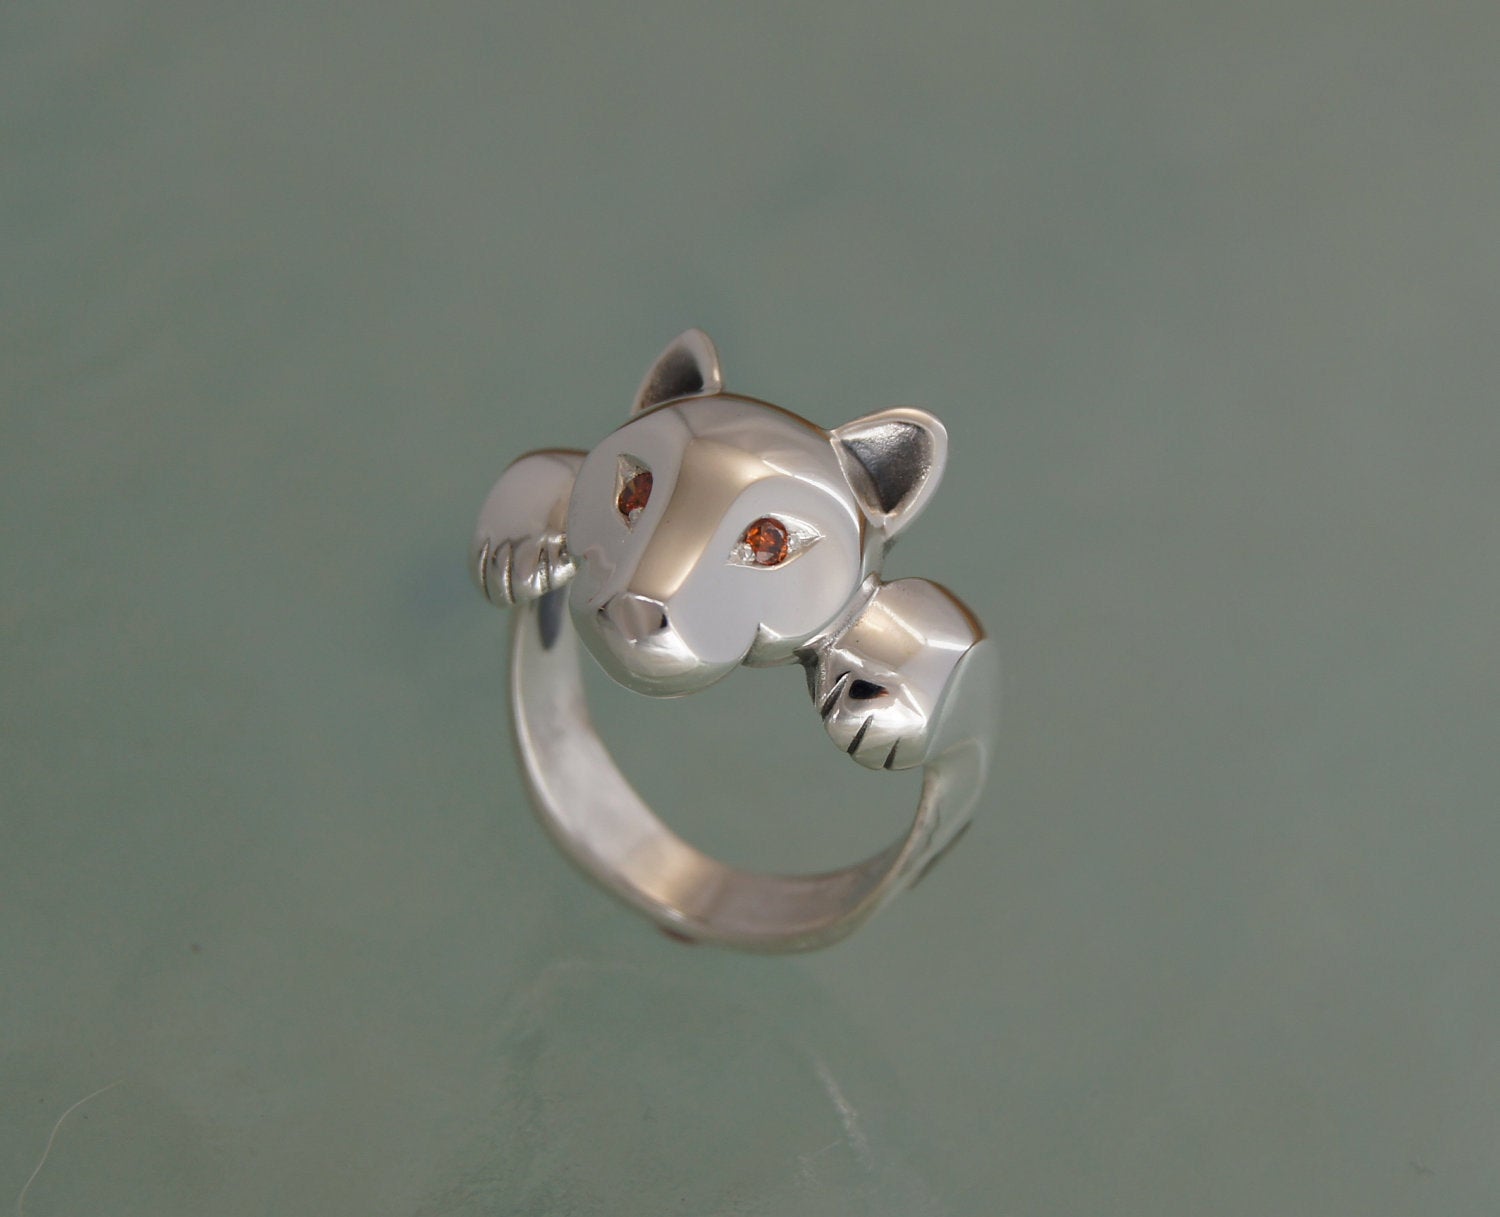 leaping puma silver ring with gemstone eyes